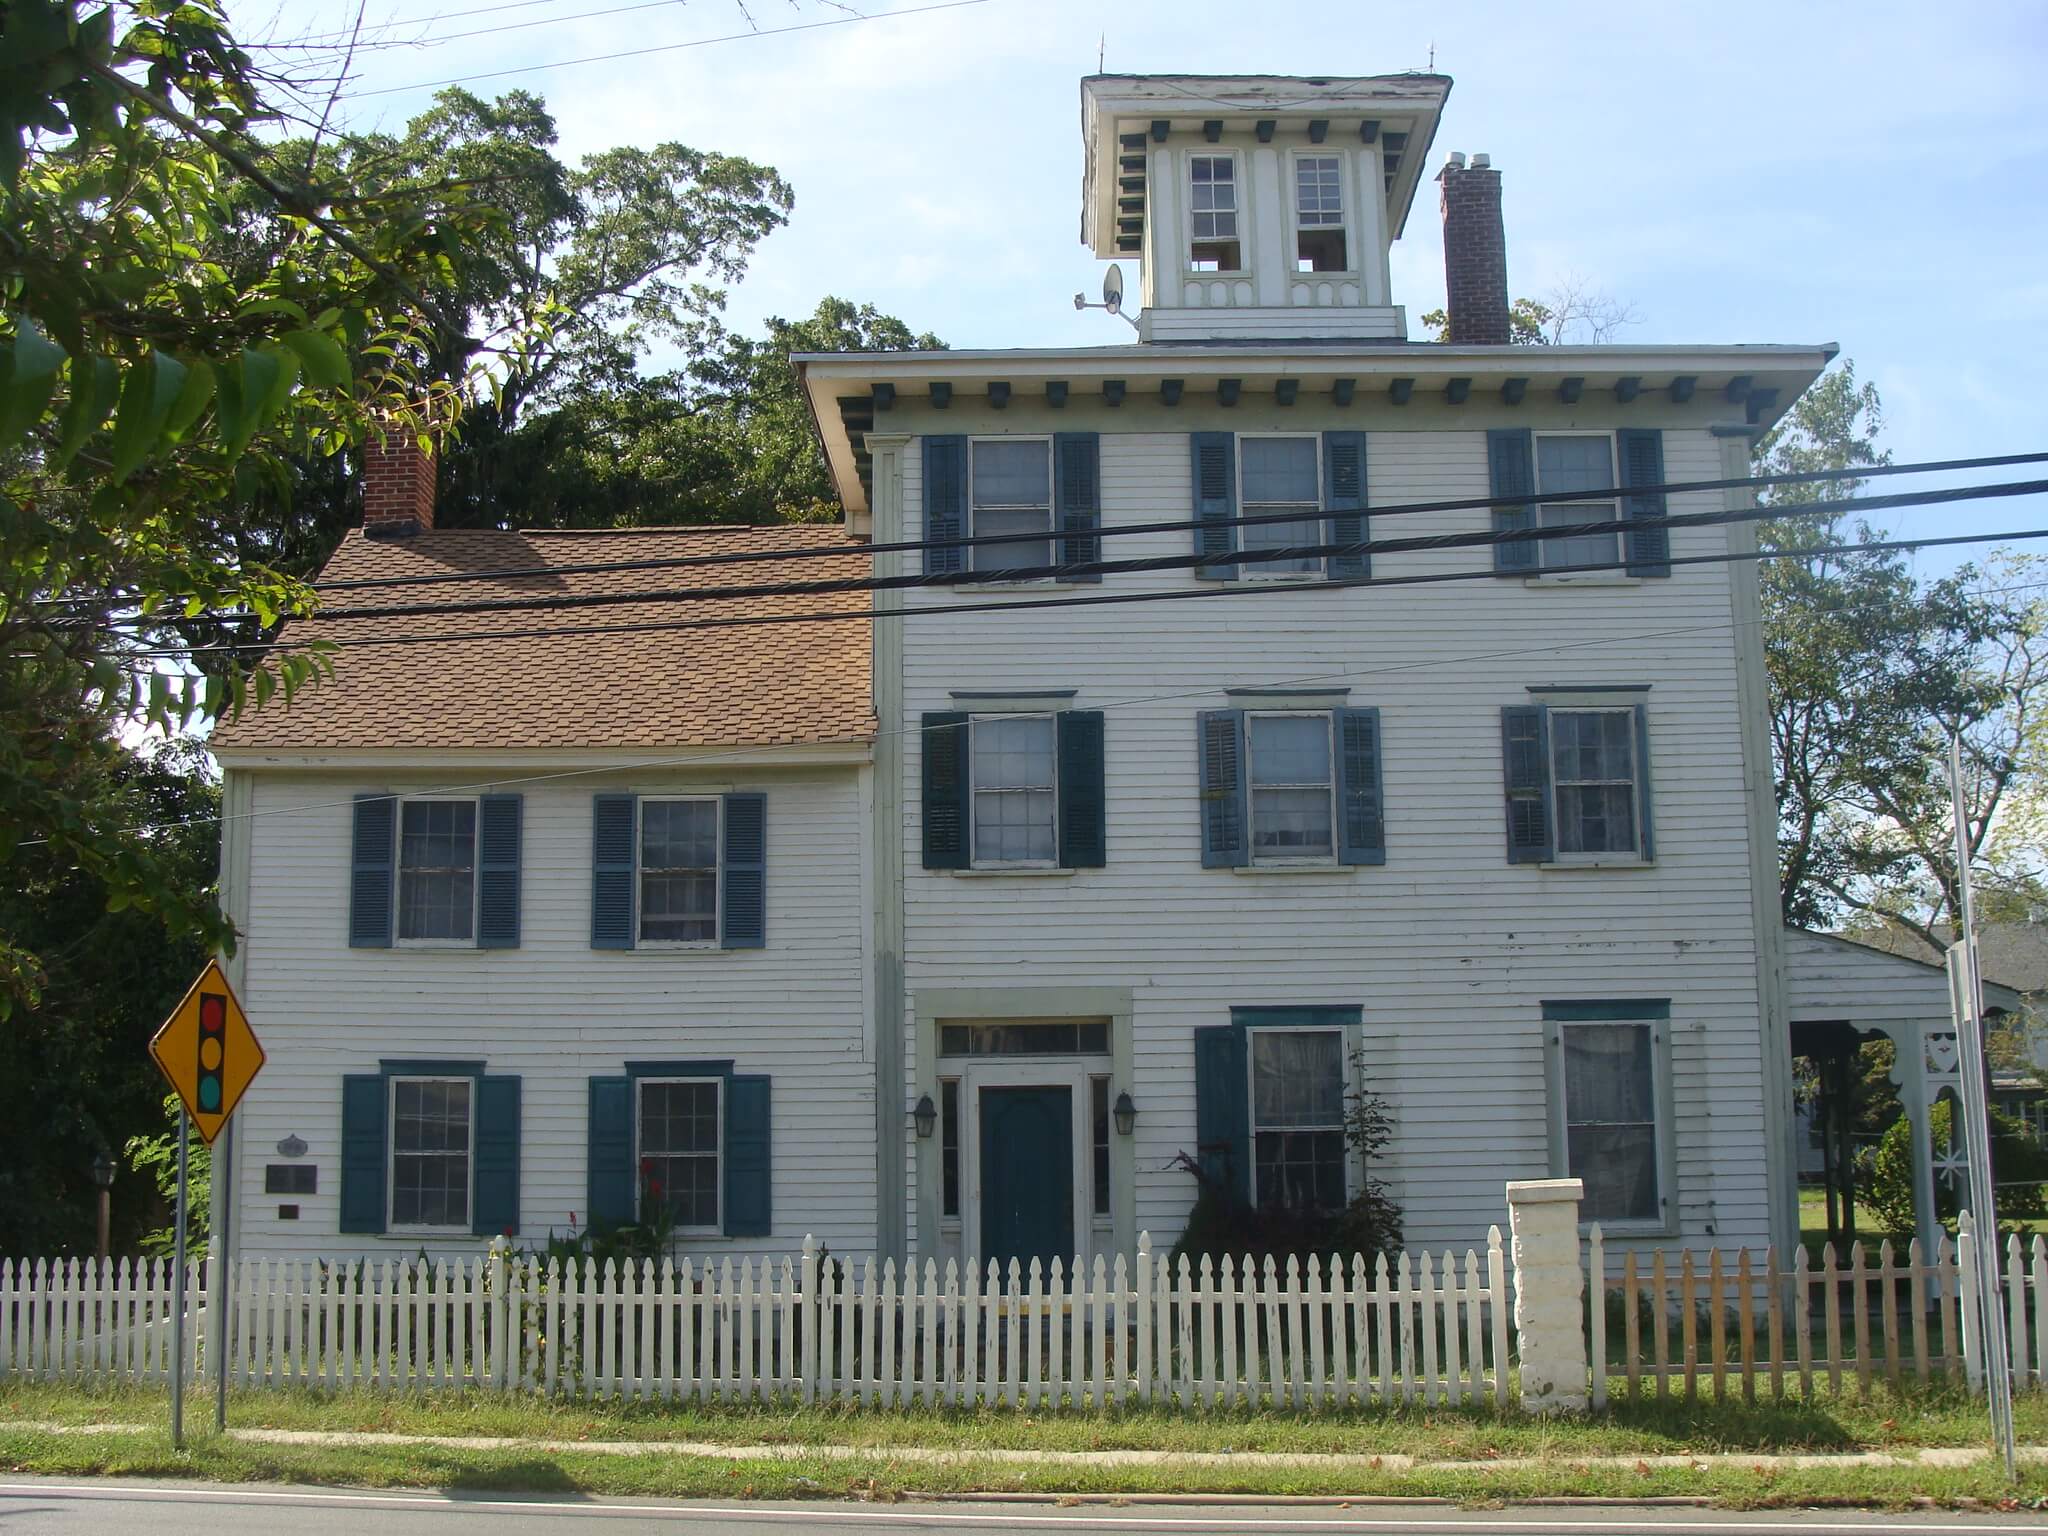 The Dr. Jonathan Pitney House in Atlantic City appears old and eerie